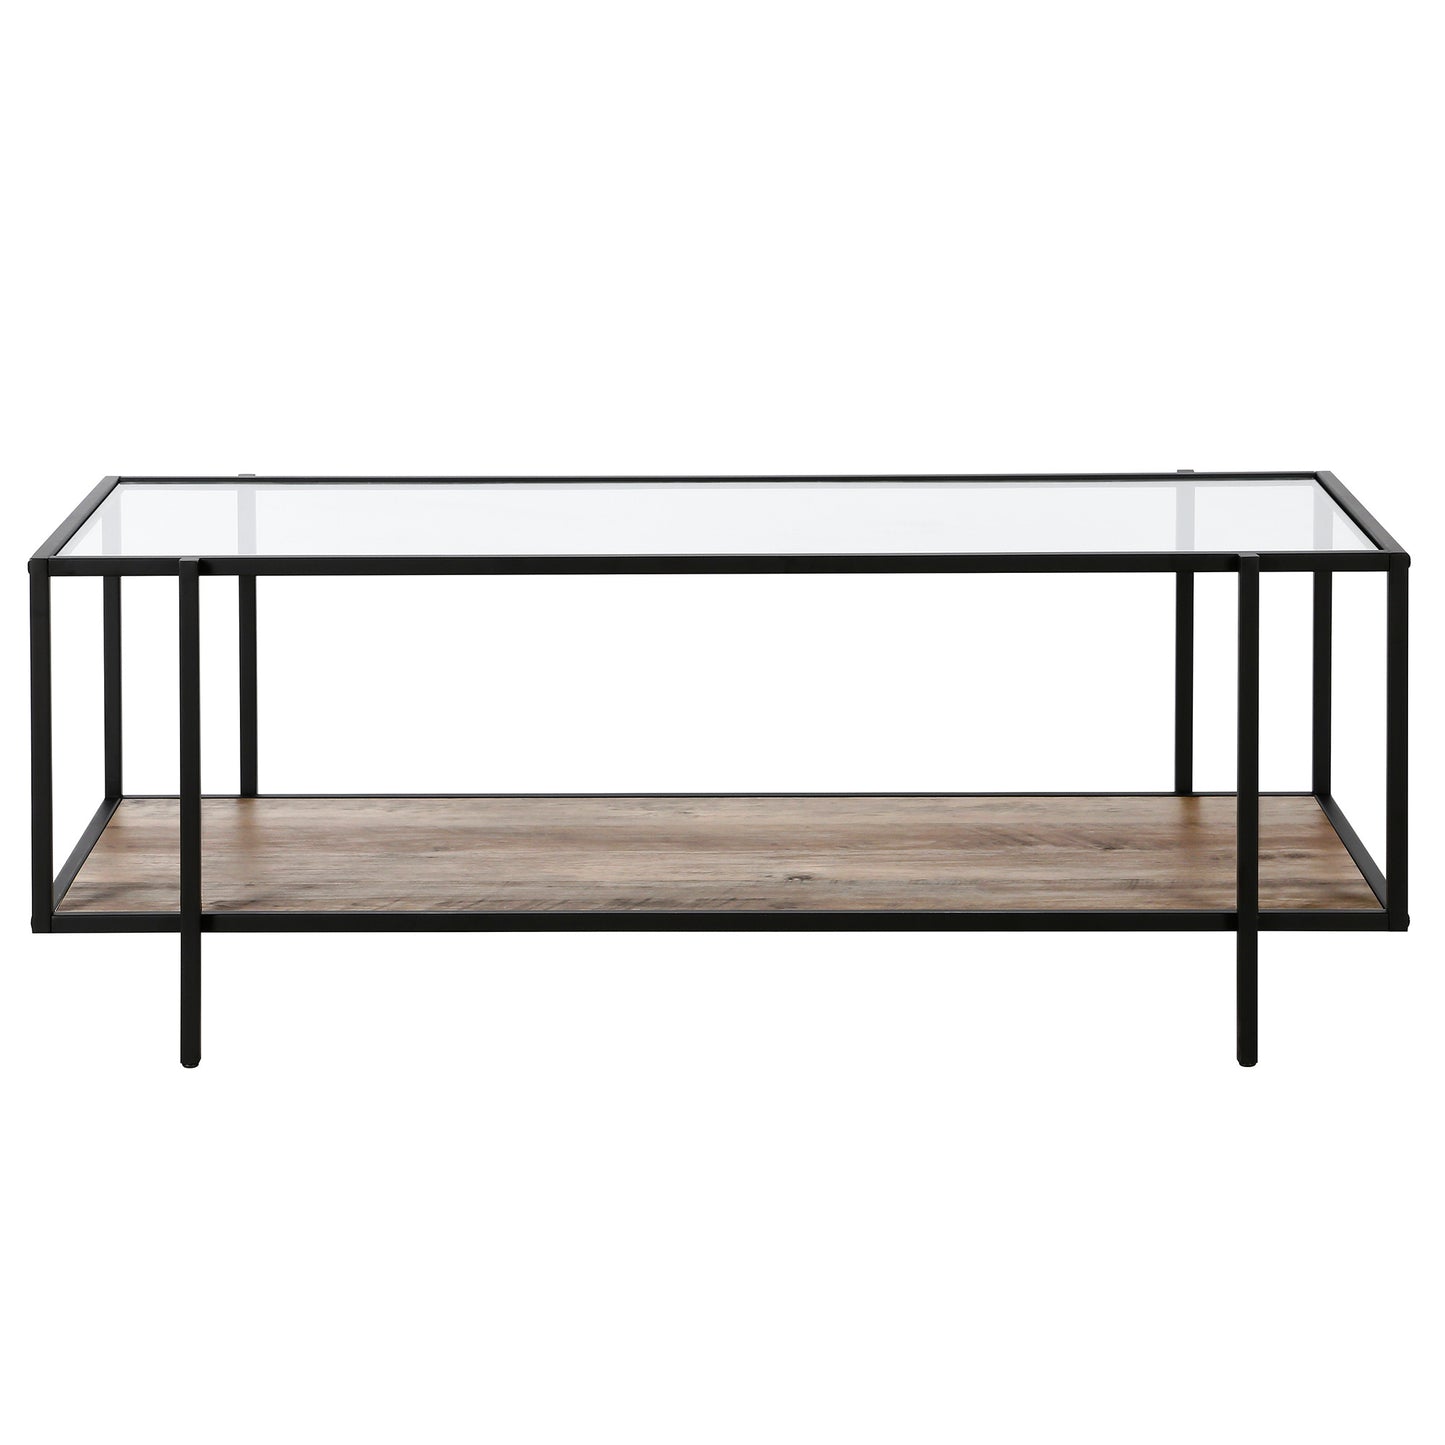 45" Gray And Black Glass And Steel Coffee Table With Shelf